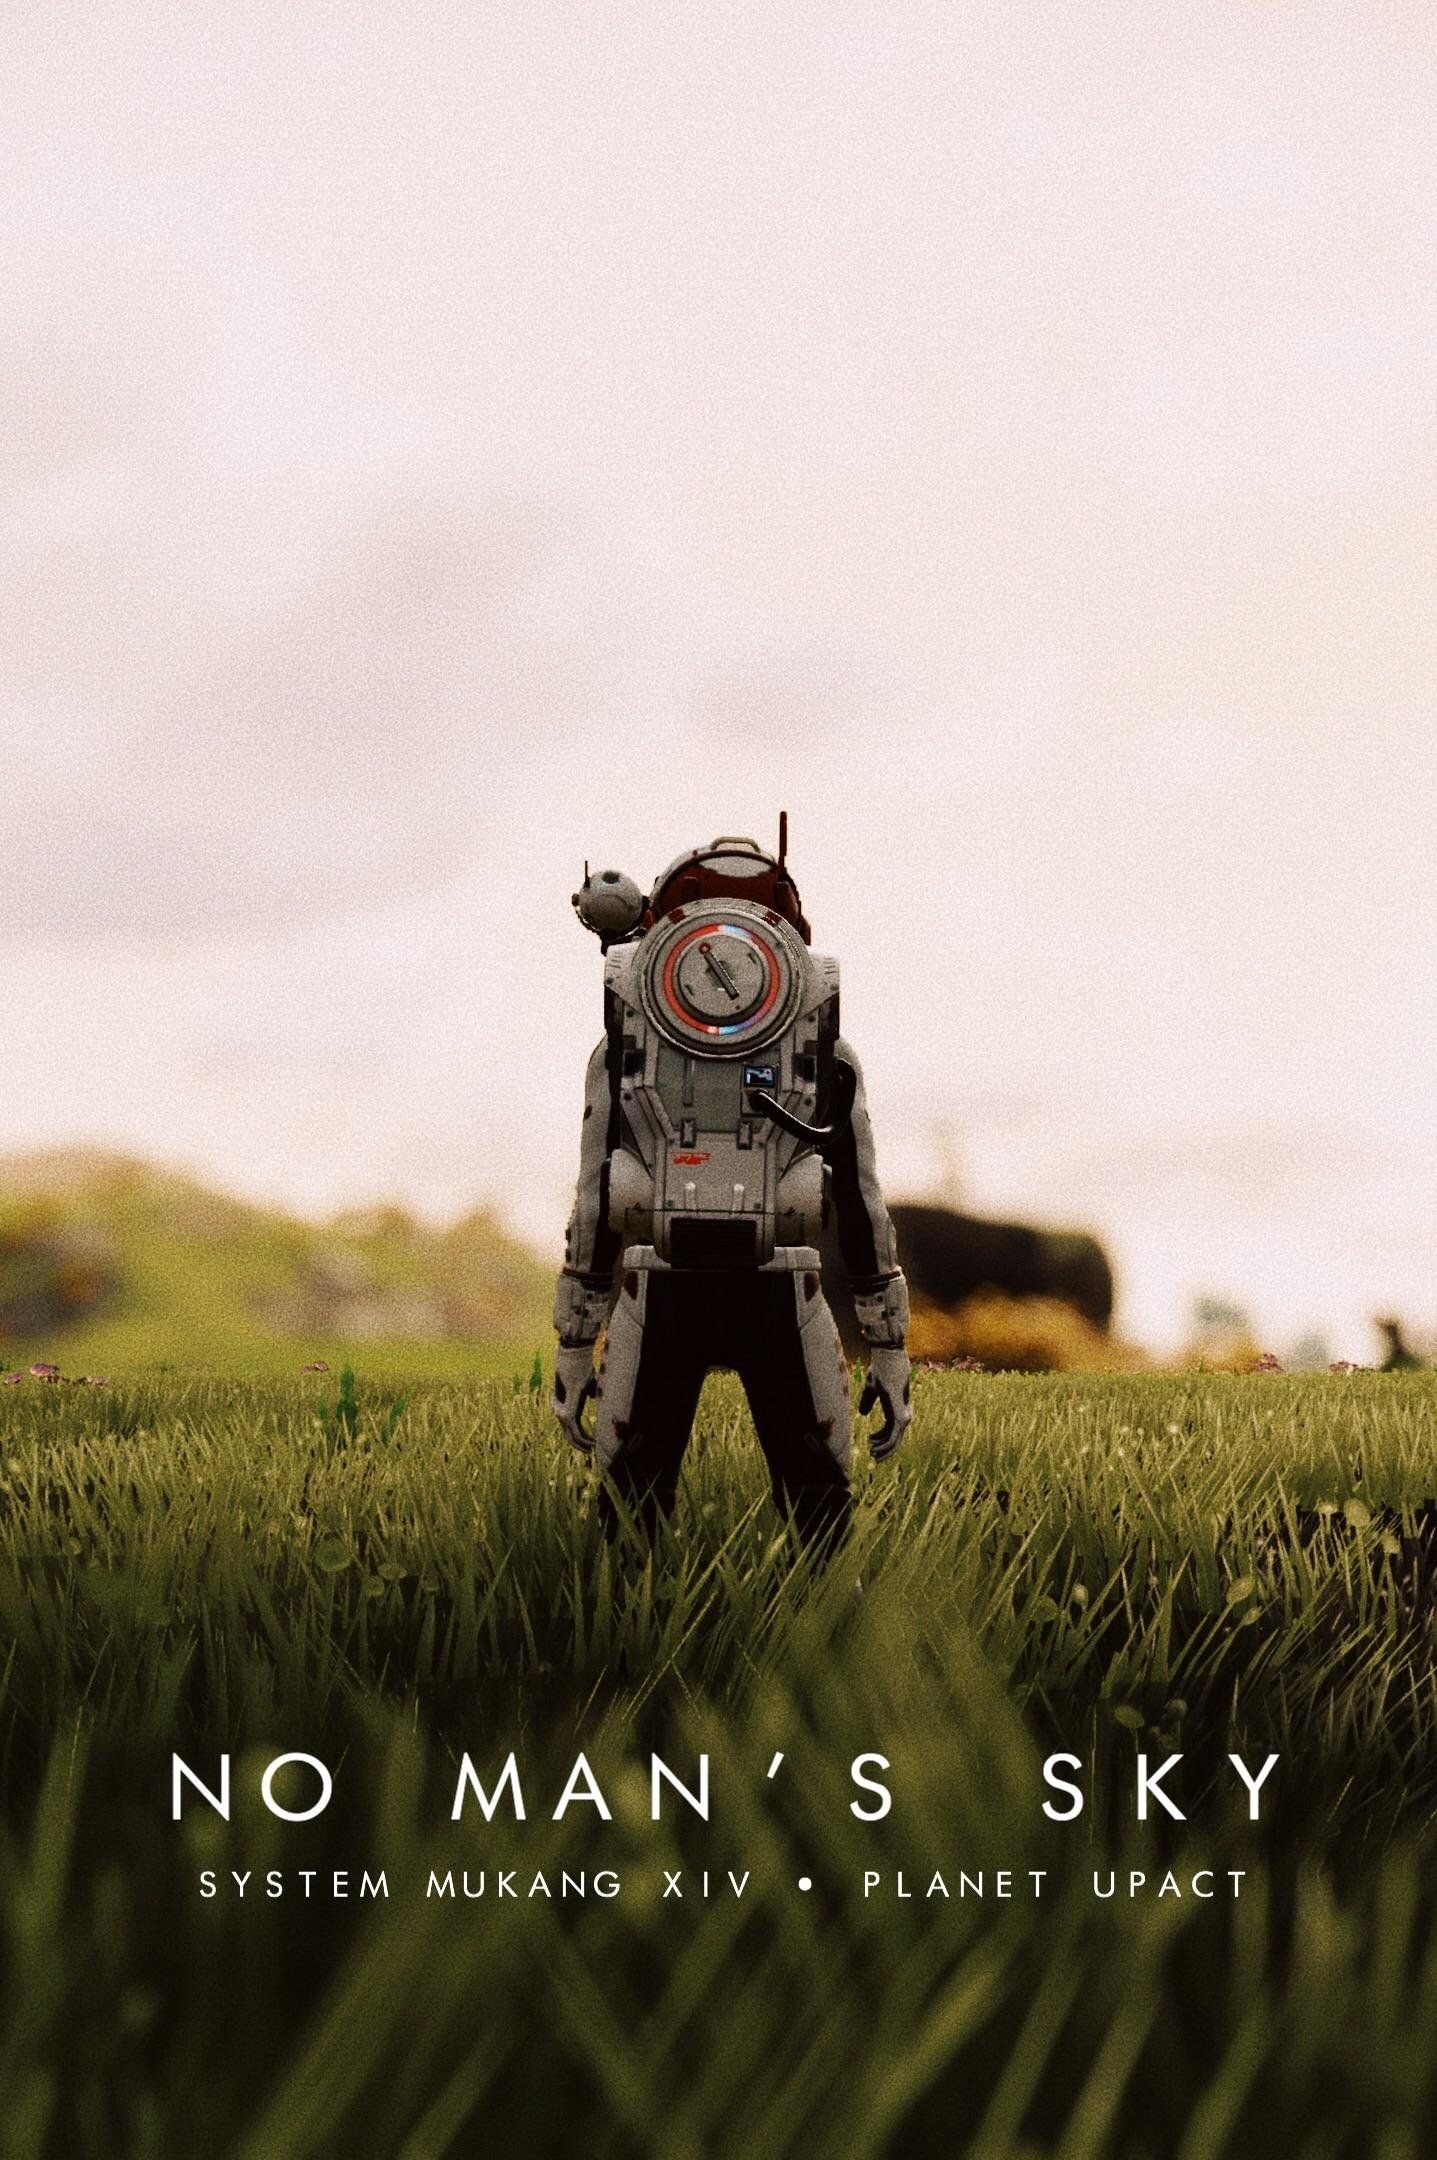 No Man's Sky mobile wallpapers, Phone background images, HD gaming art, Captivating visuals, 1440x2160 HD Phone